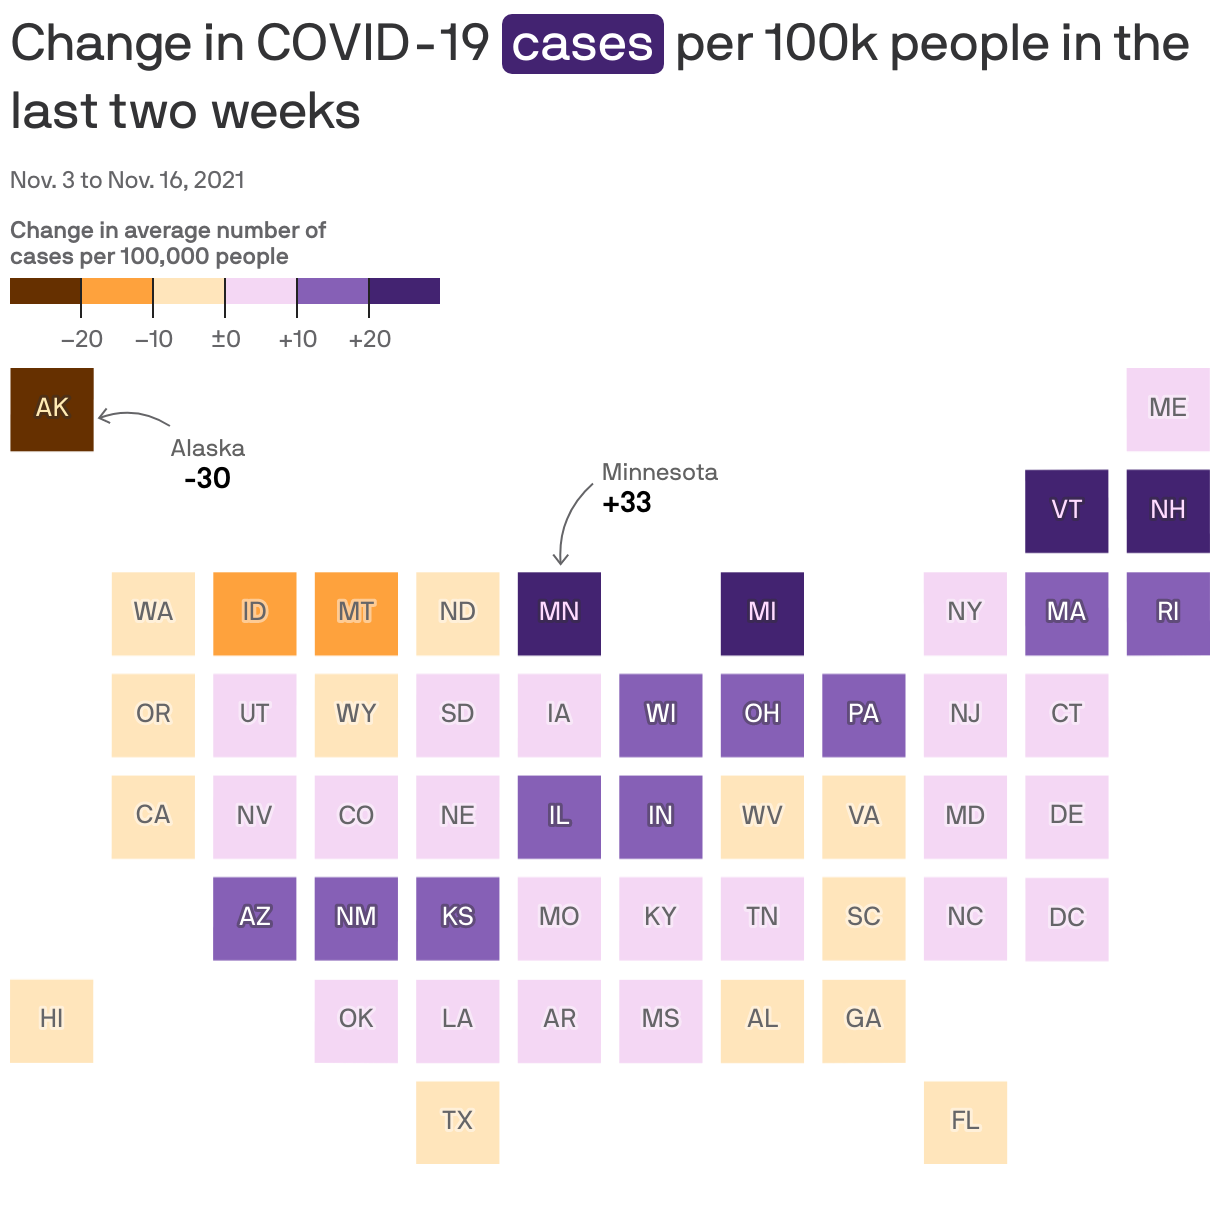 Change in COVID-19 <span style="background:#432371;padding:2px 5px;border-radius:5px;color:white;">cases</span> per 100k people in the last two weeks